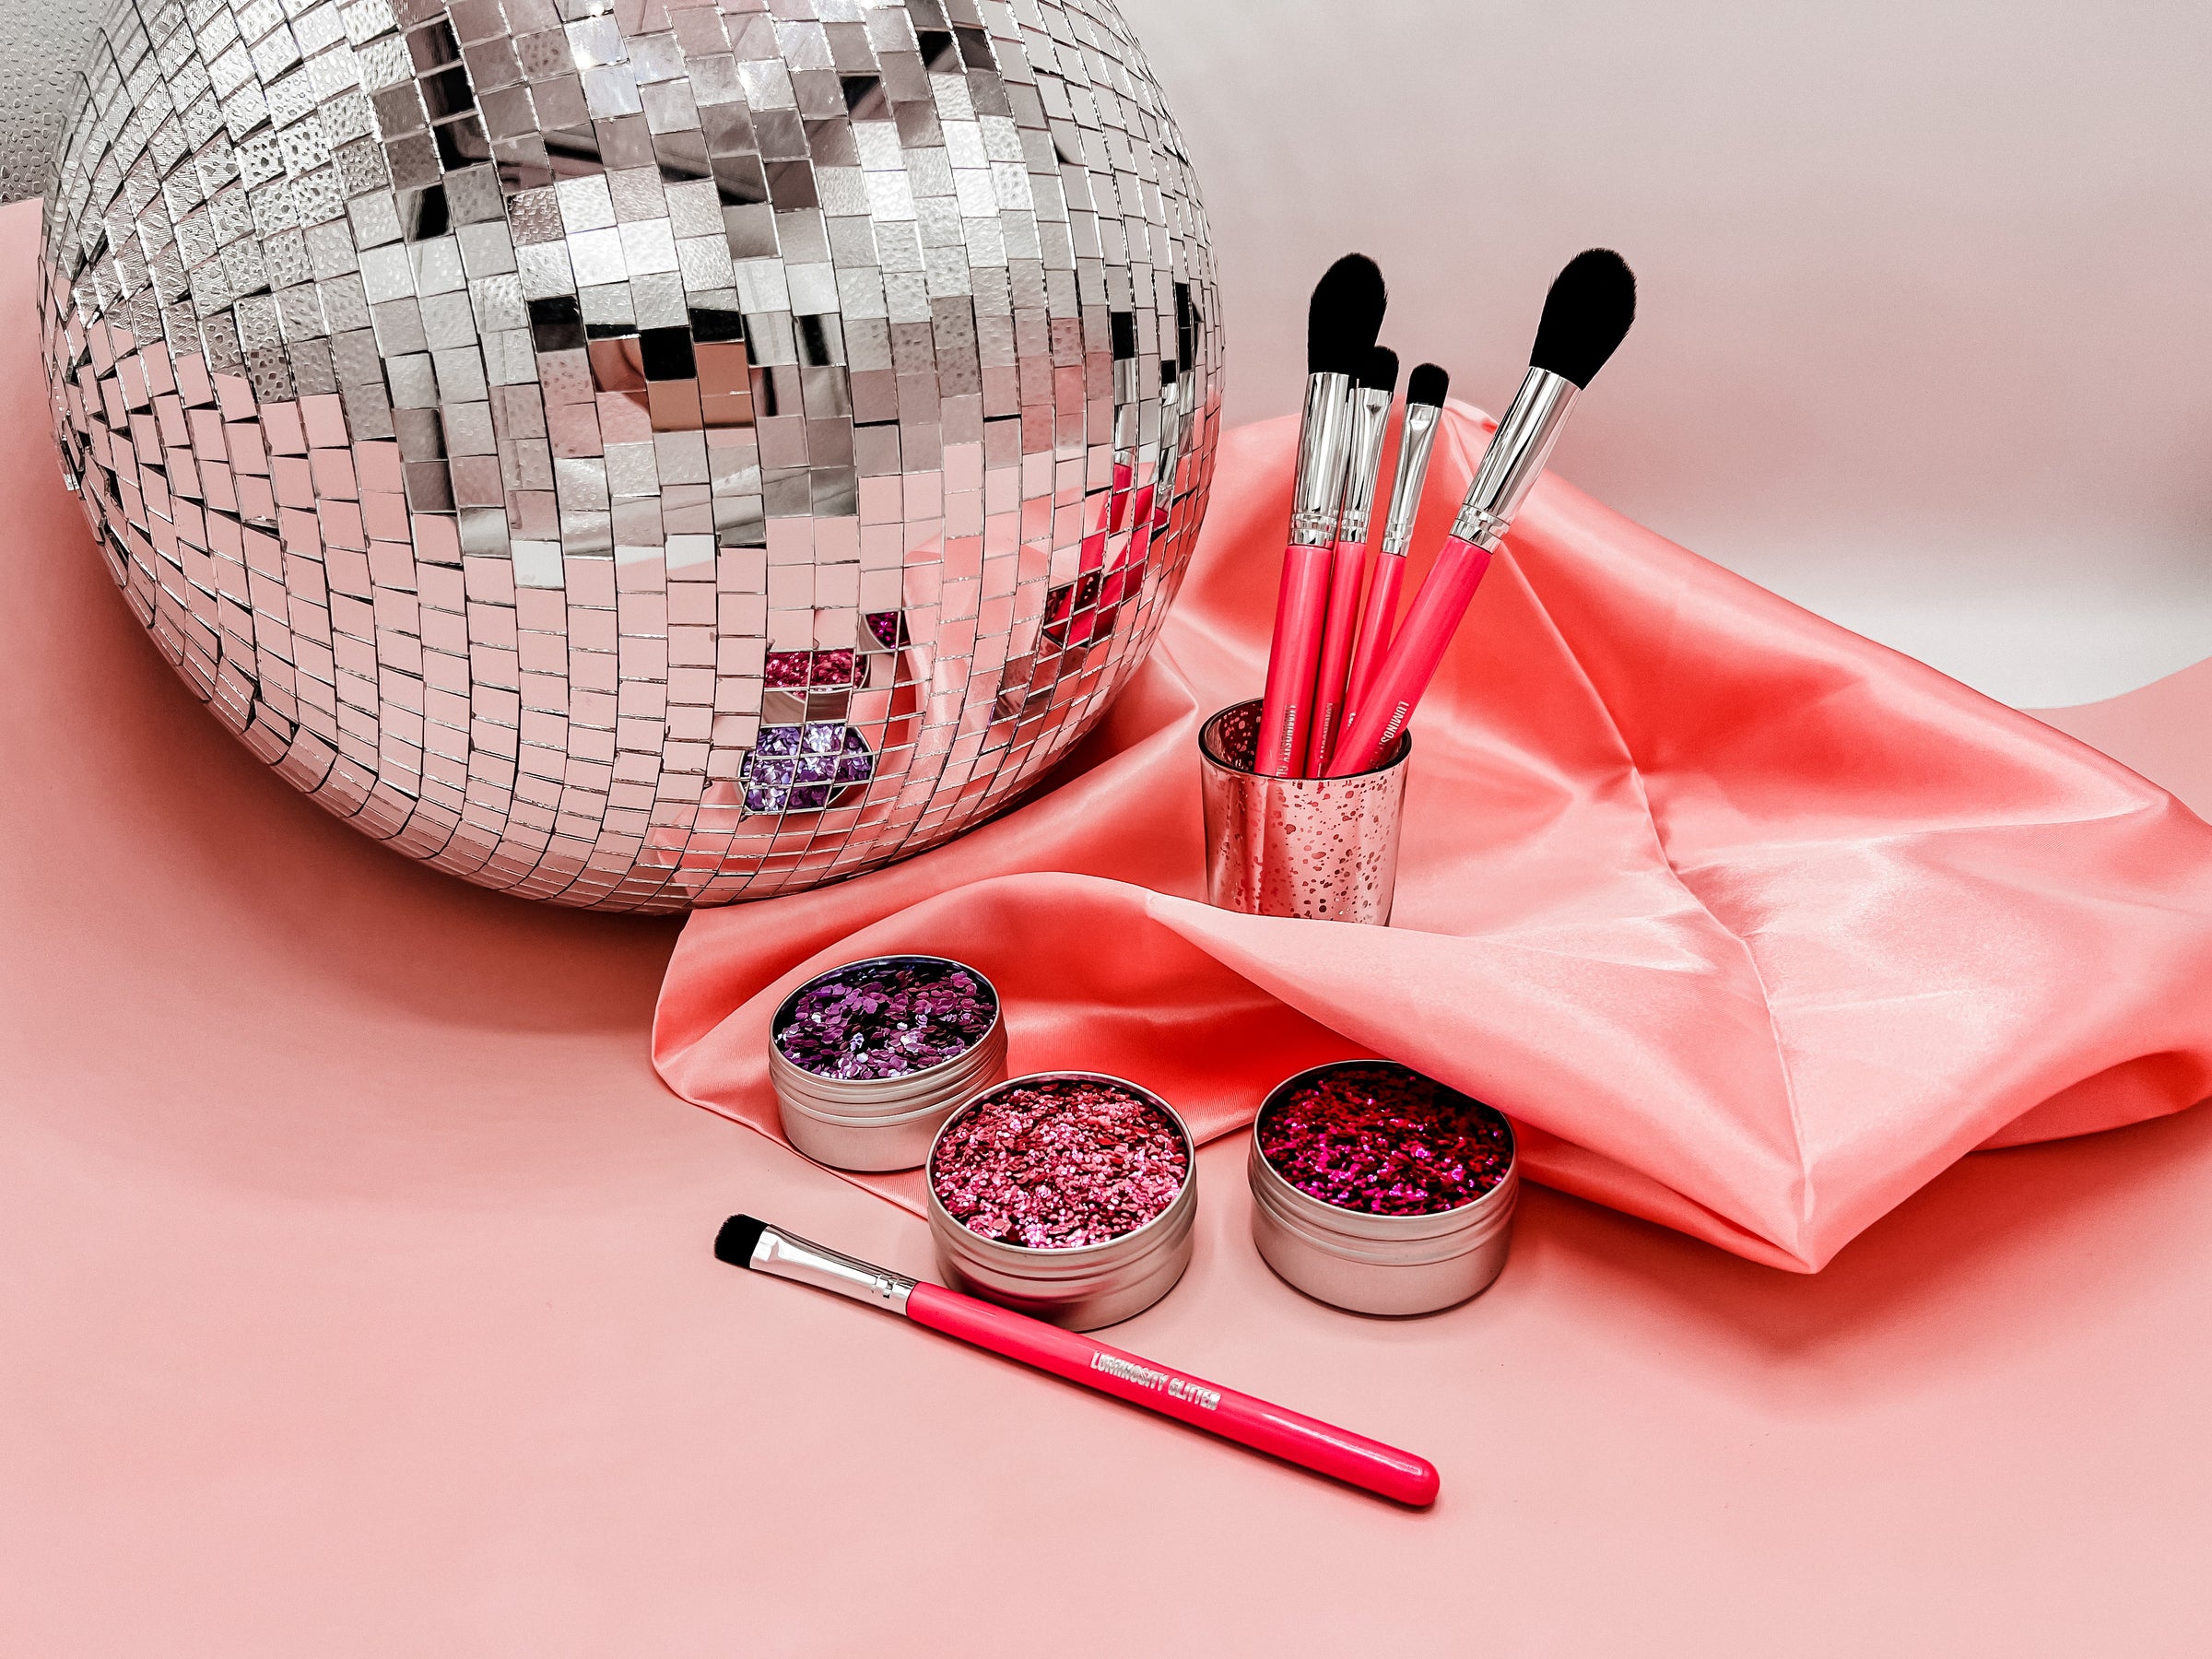 Giant disco ball with eco friendly glitter and hot pink makeup brushes on a pink and silk pink background